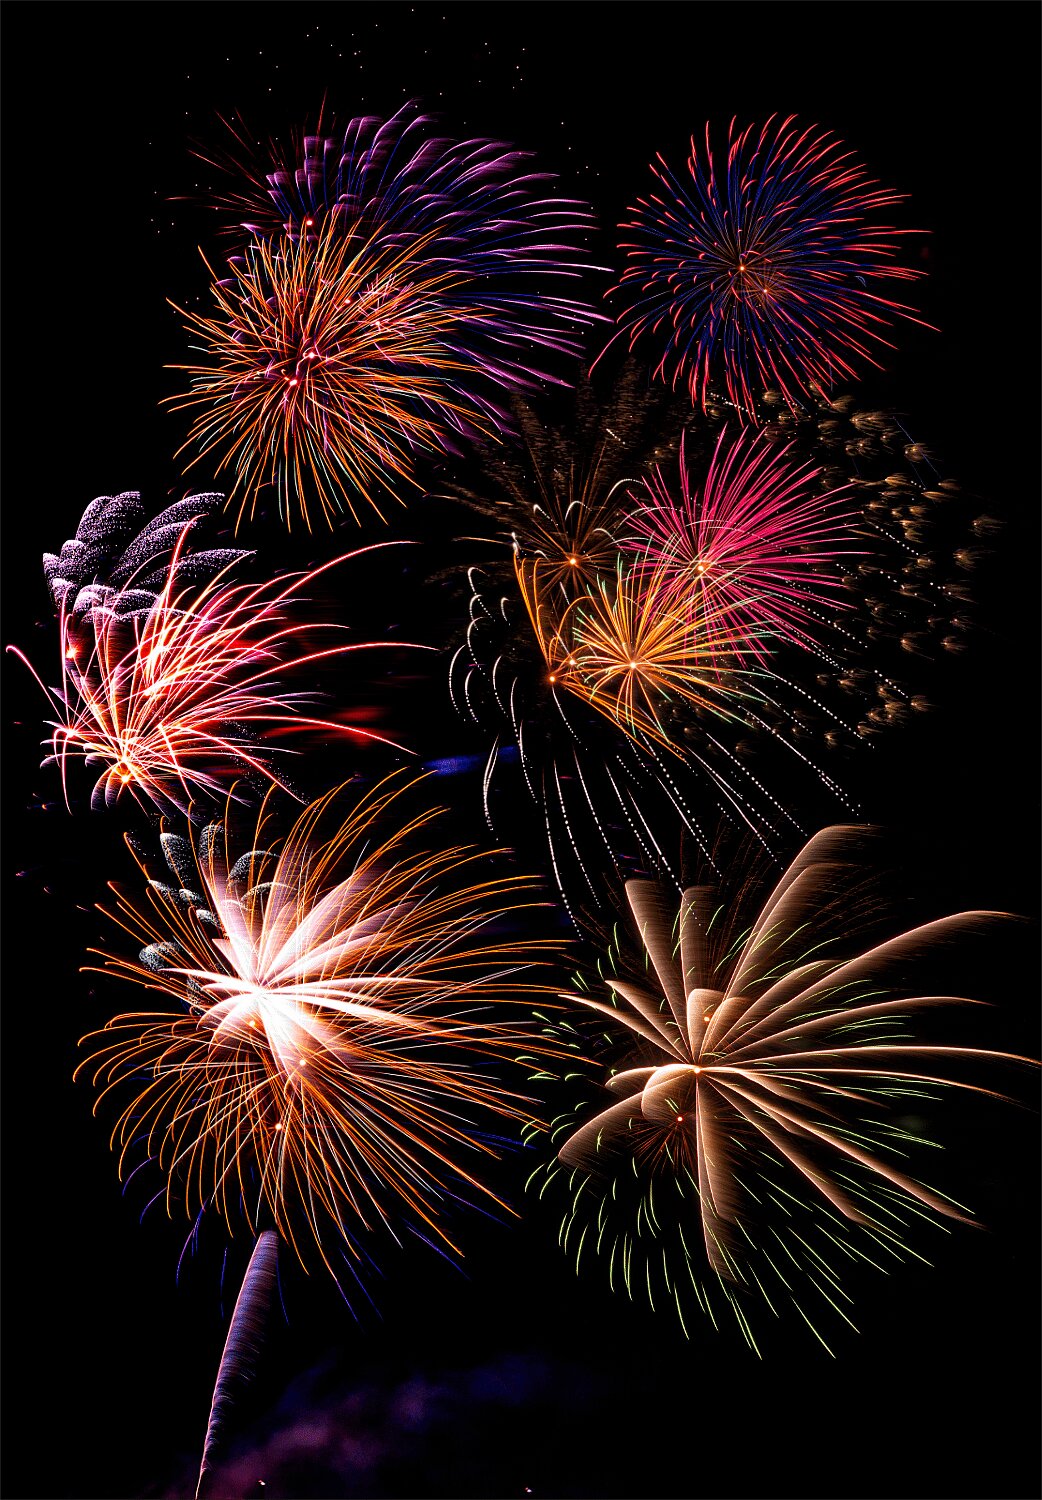 A composite of six separate photos gives an idea of the range of colors experienced by those present at Mineola's annual Independence Day fireworks show.